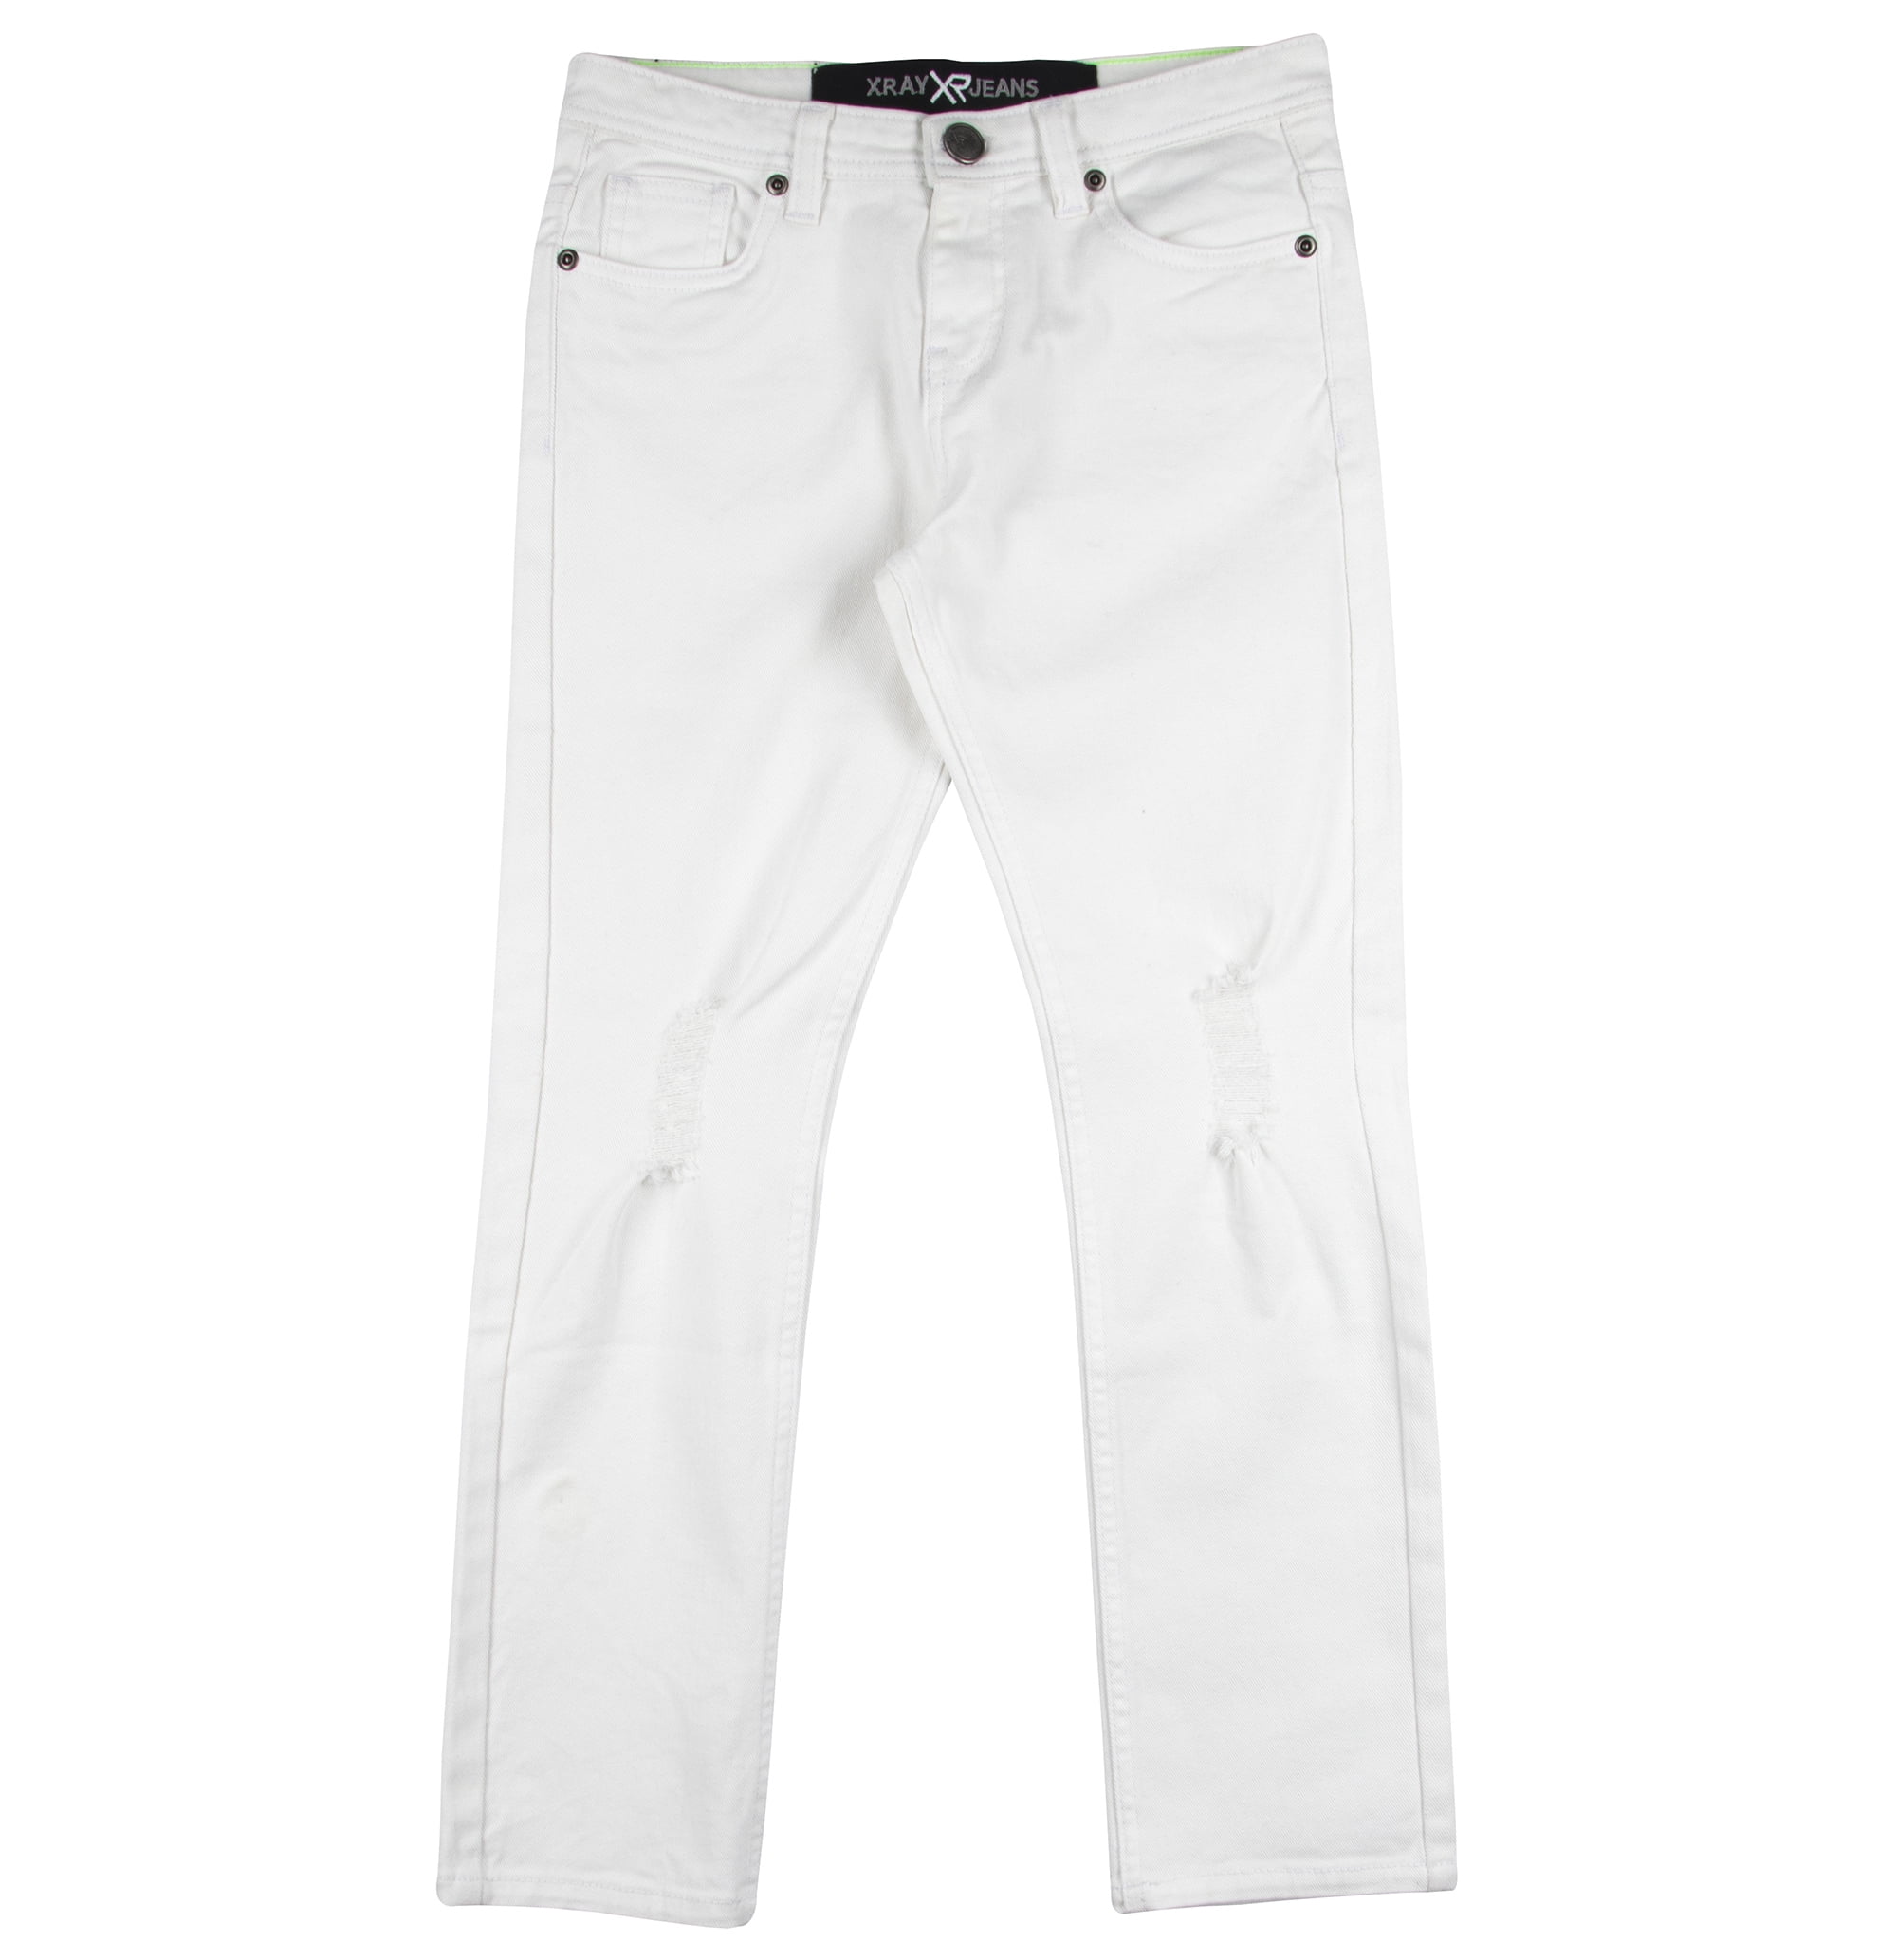 X Ray Jeans - X RAY Skinny Jeans for Boys Slim Fit Denim Pants, White ...